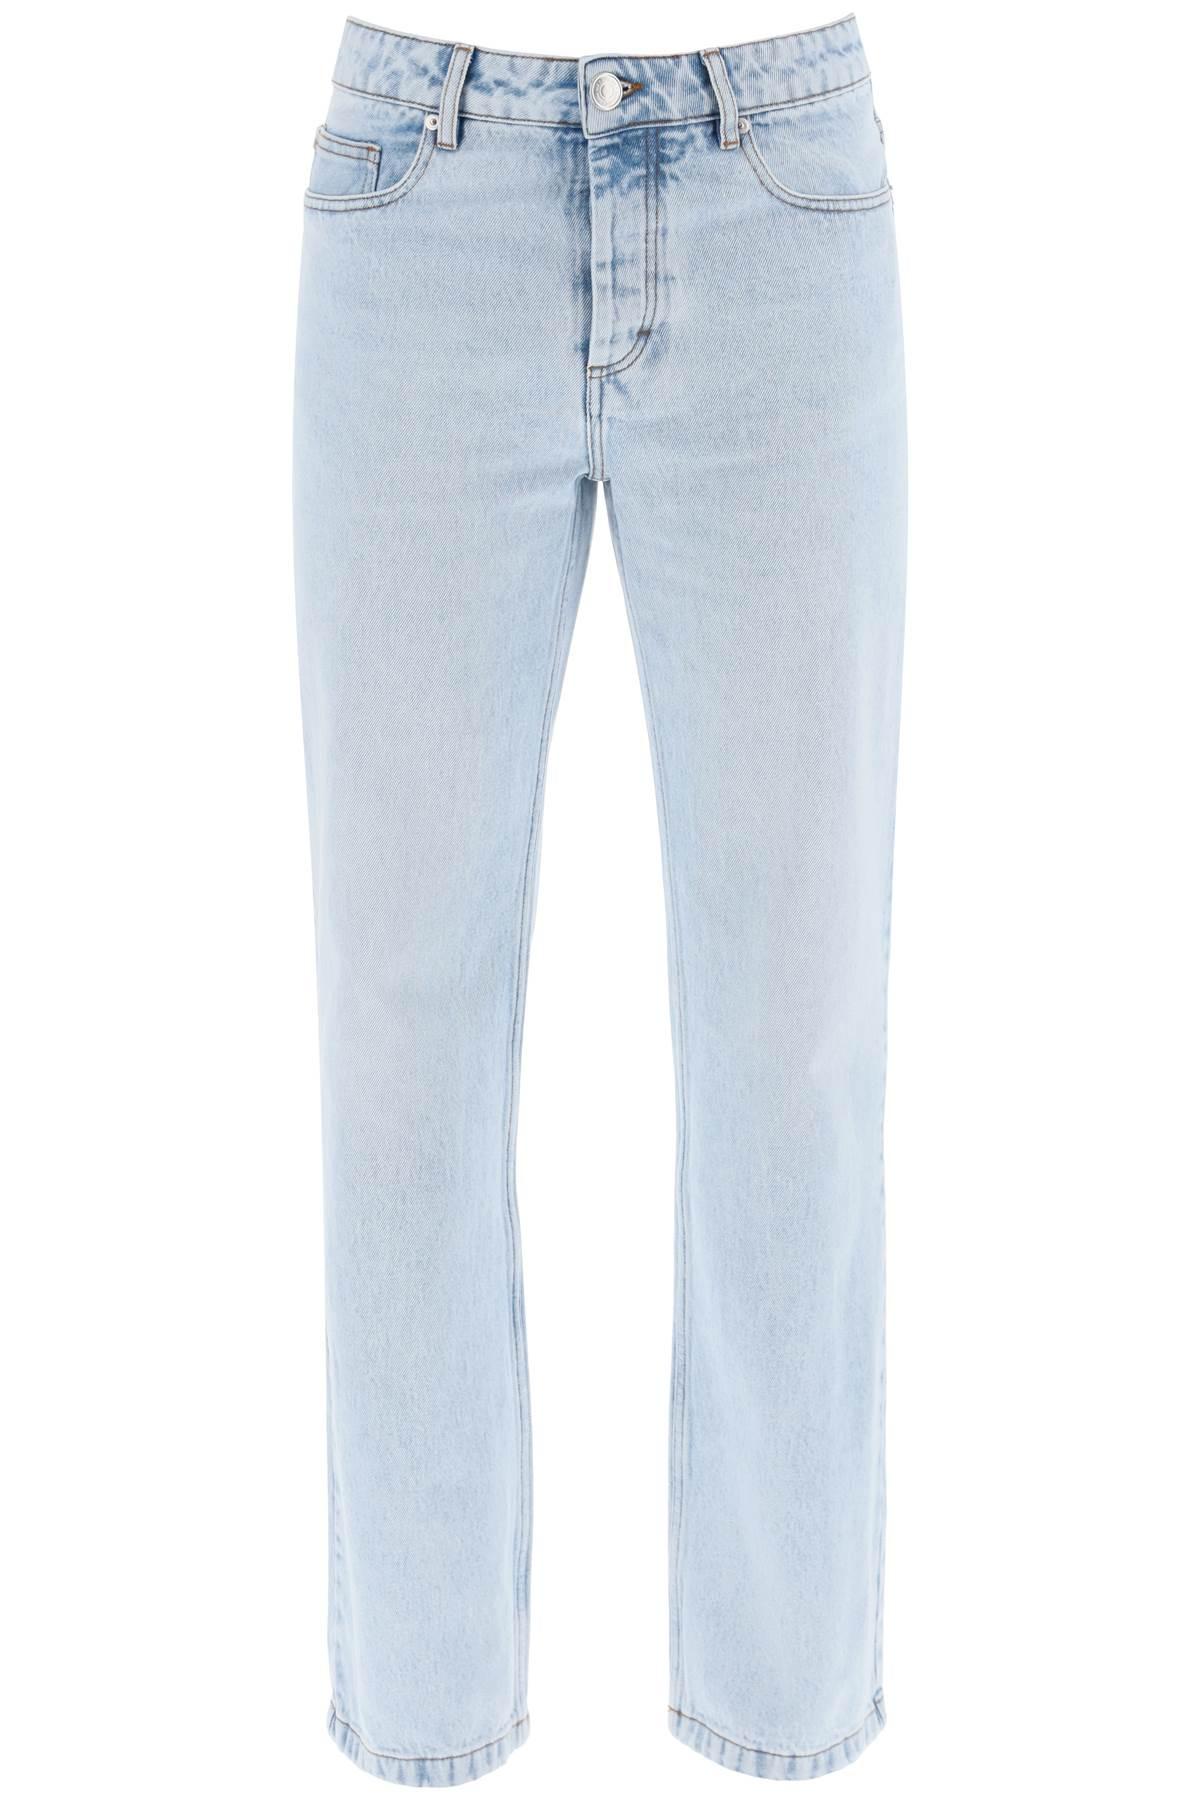 AMI ALEXANDRE MATTIUSSI AMI ALEXANDRE MATTIUSSI fit Straight Fit Jeans